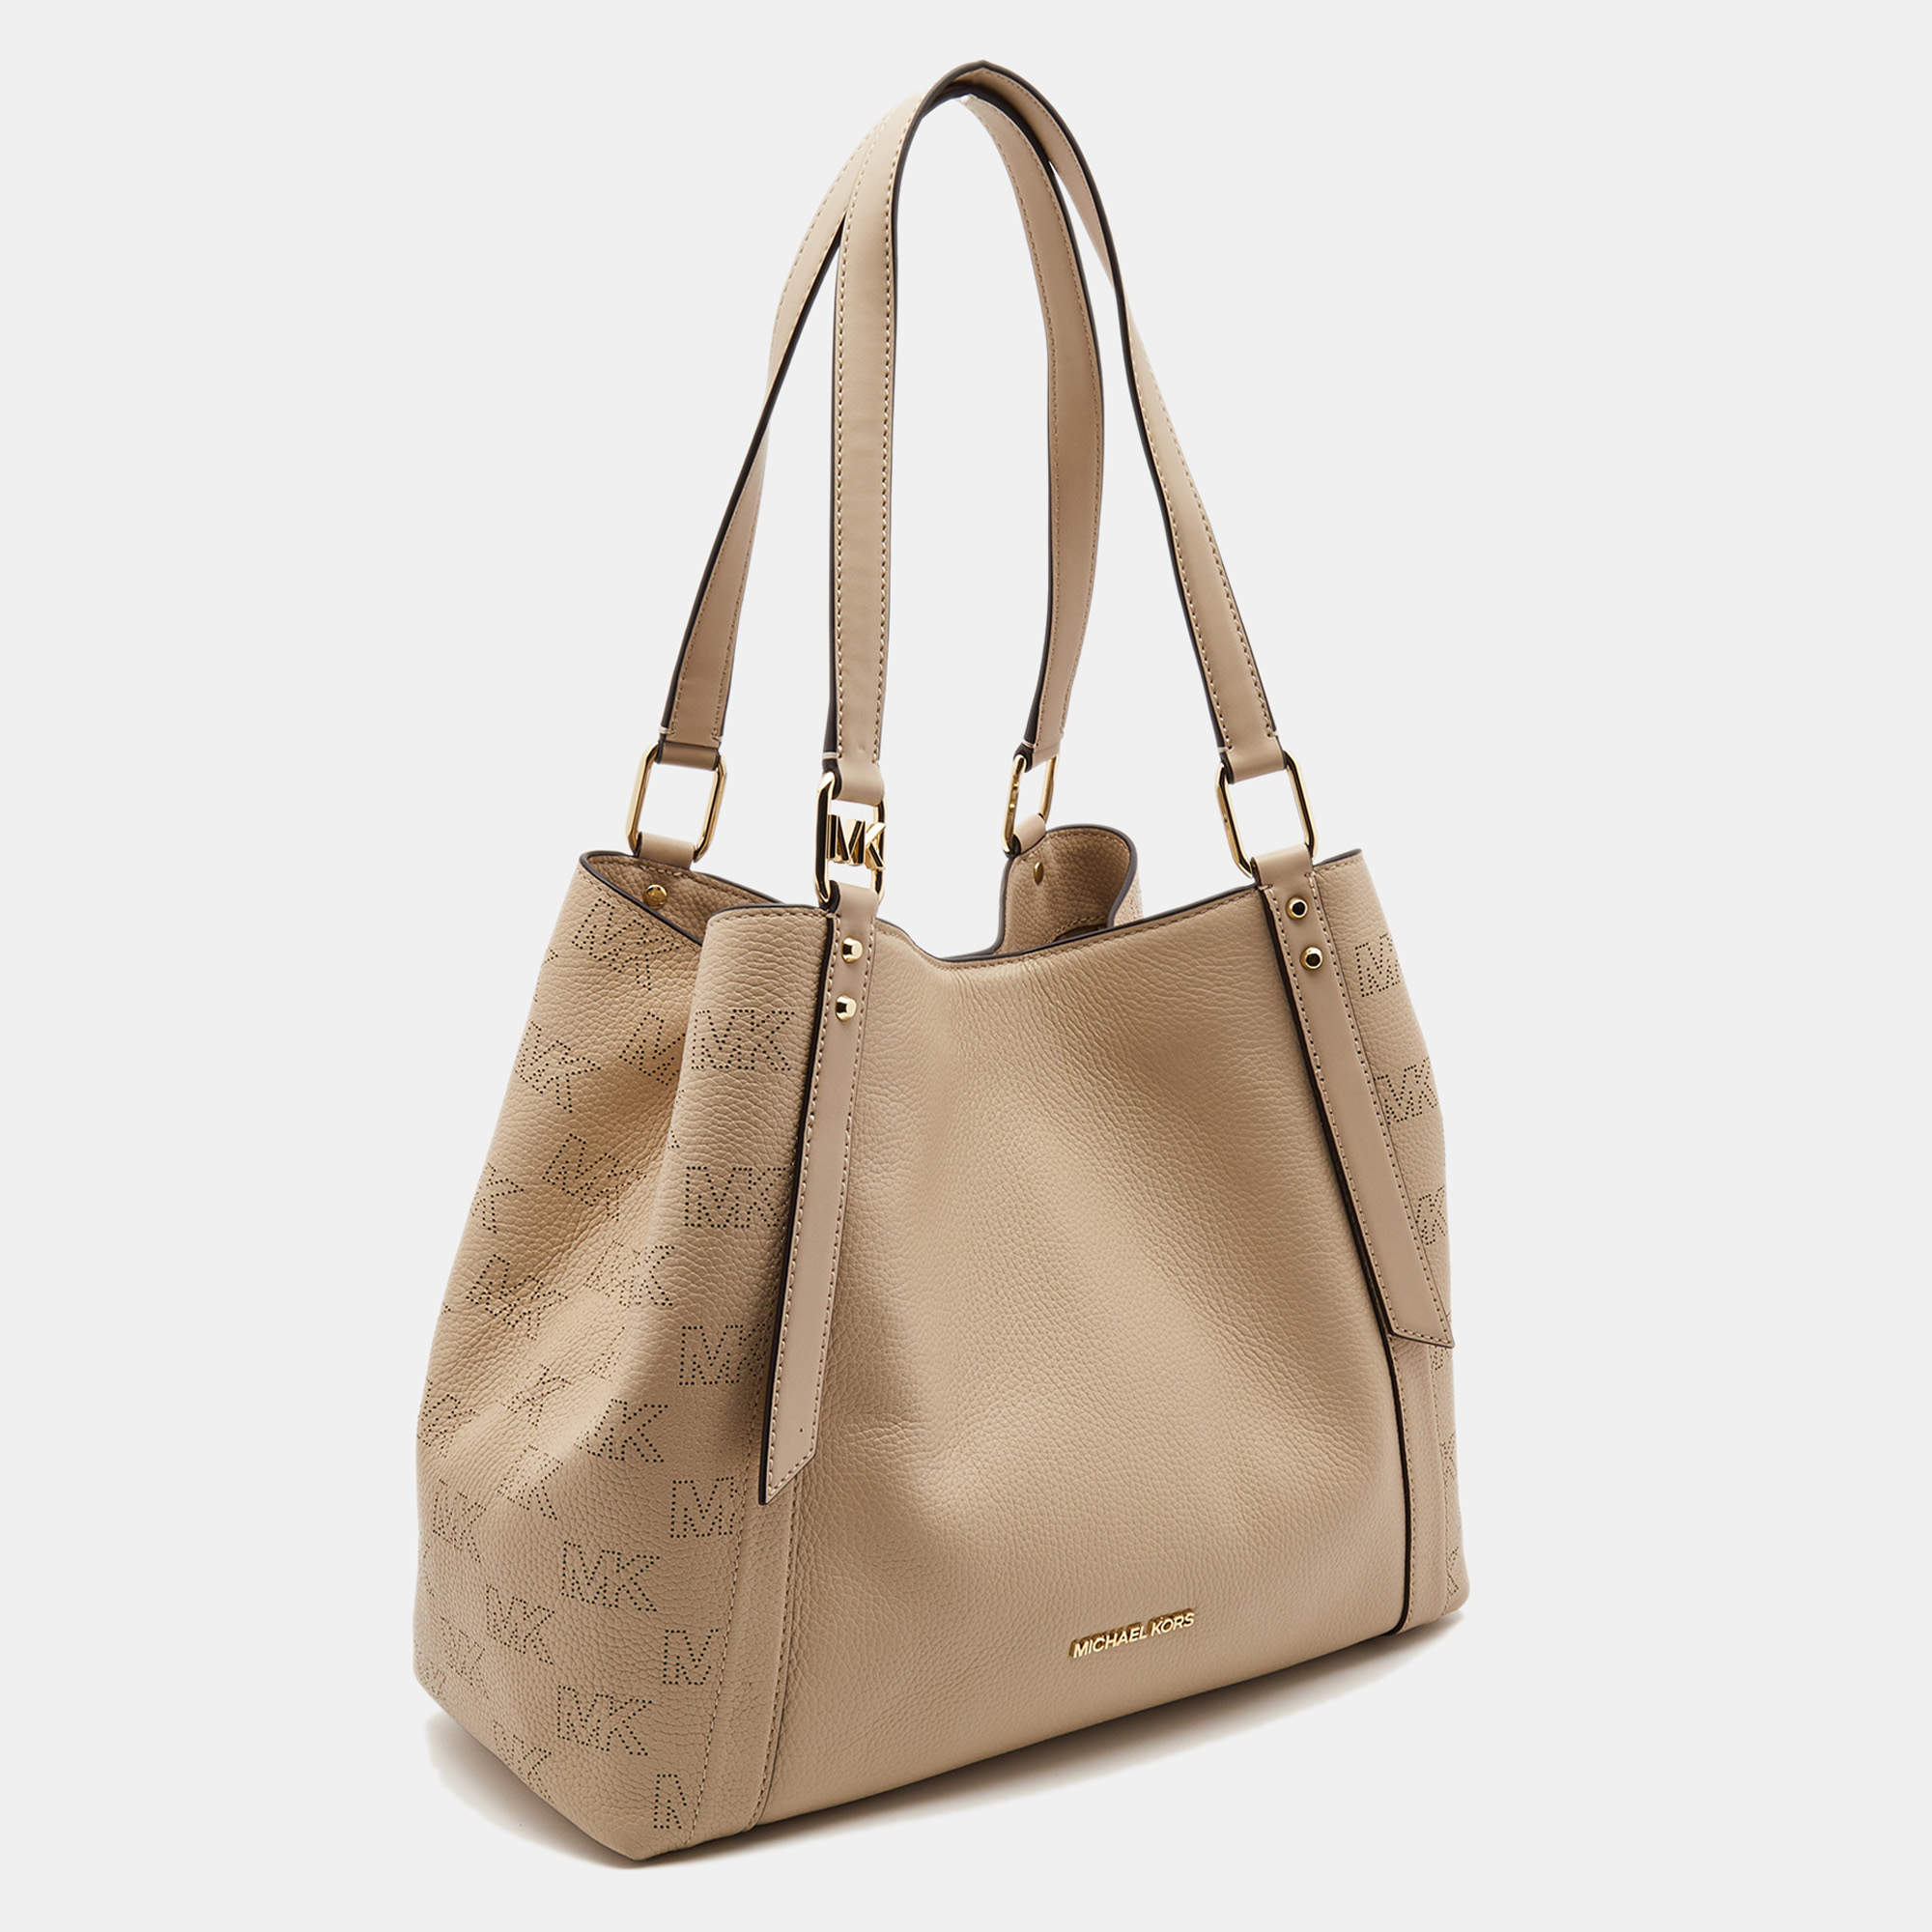 MICHAEL Michael Kors Women's Pink Tote Bags with Cash Back